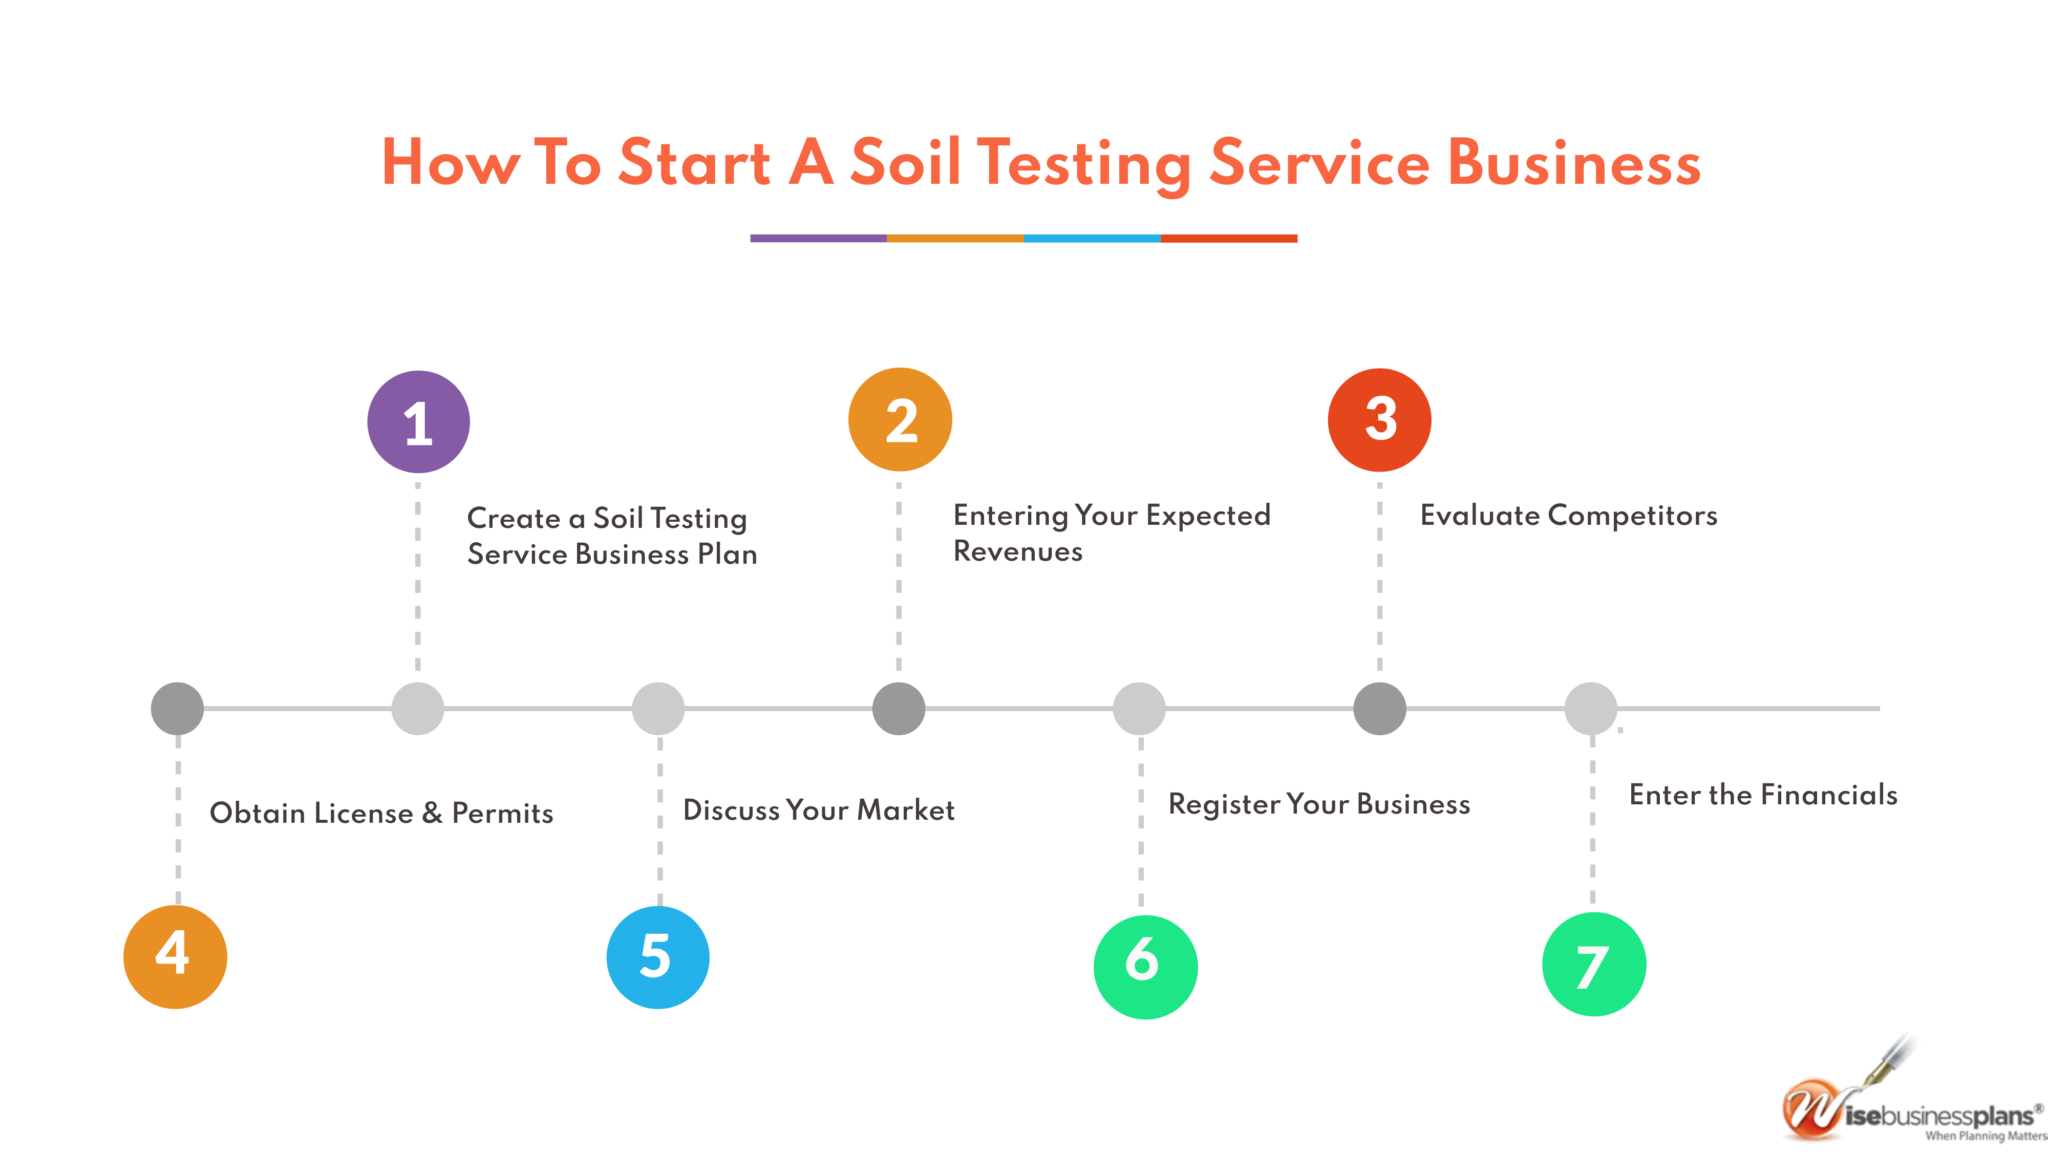 How To Start A Soil Testing Service Business